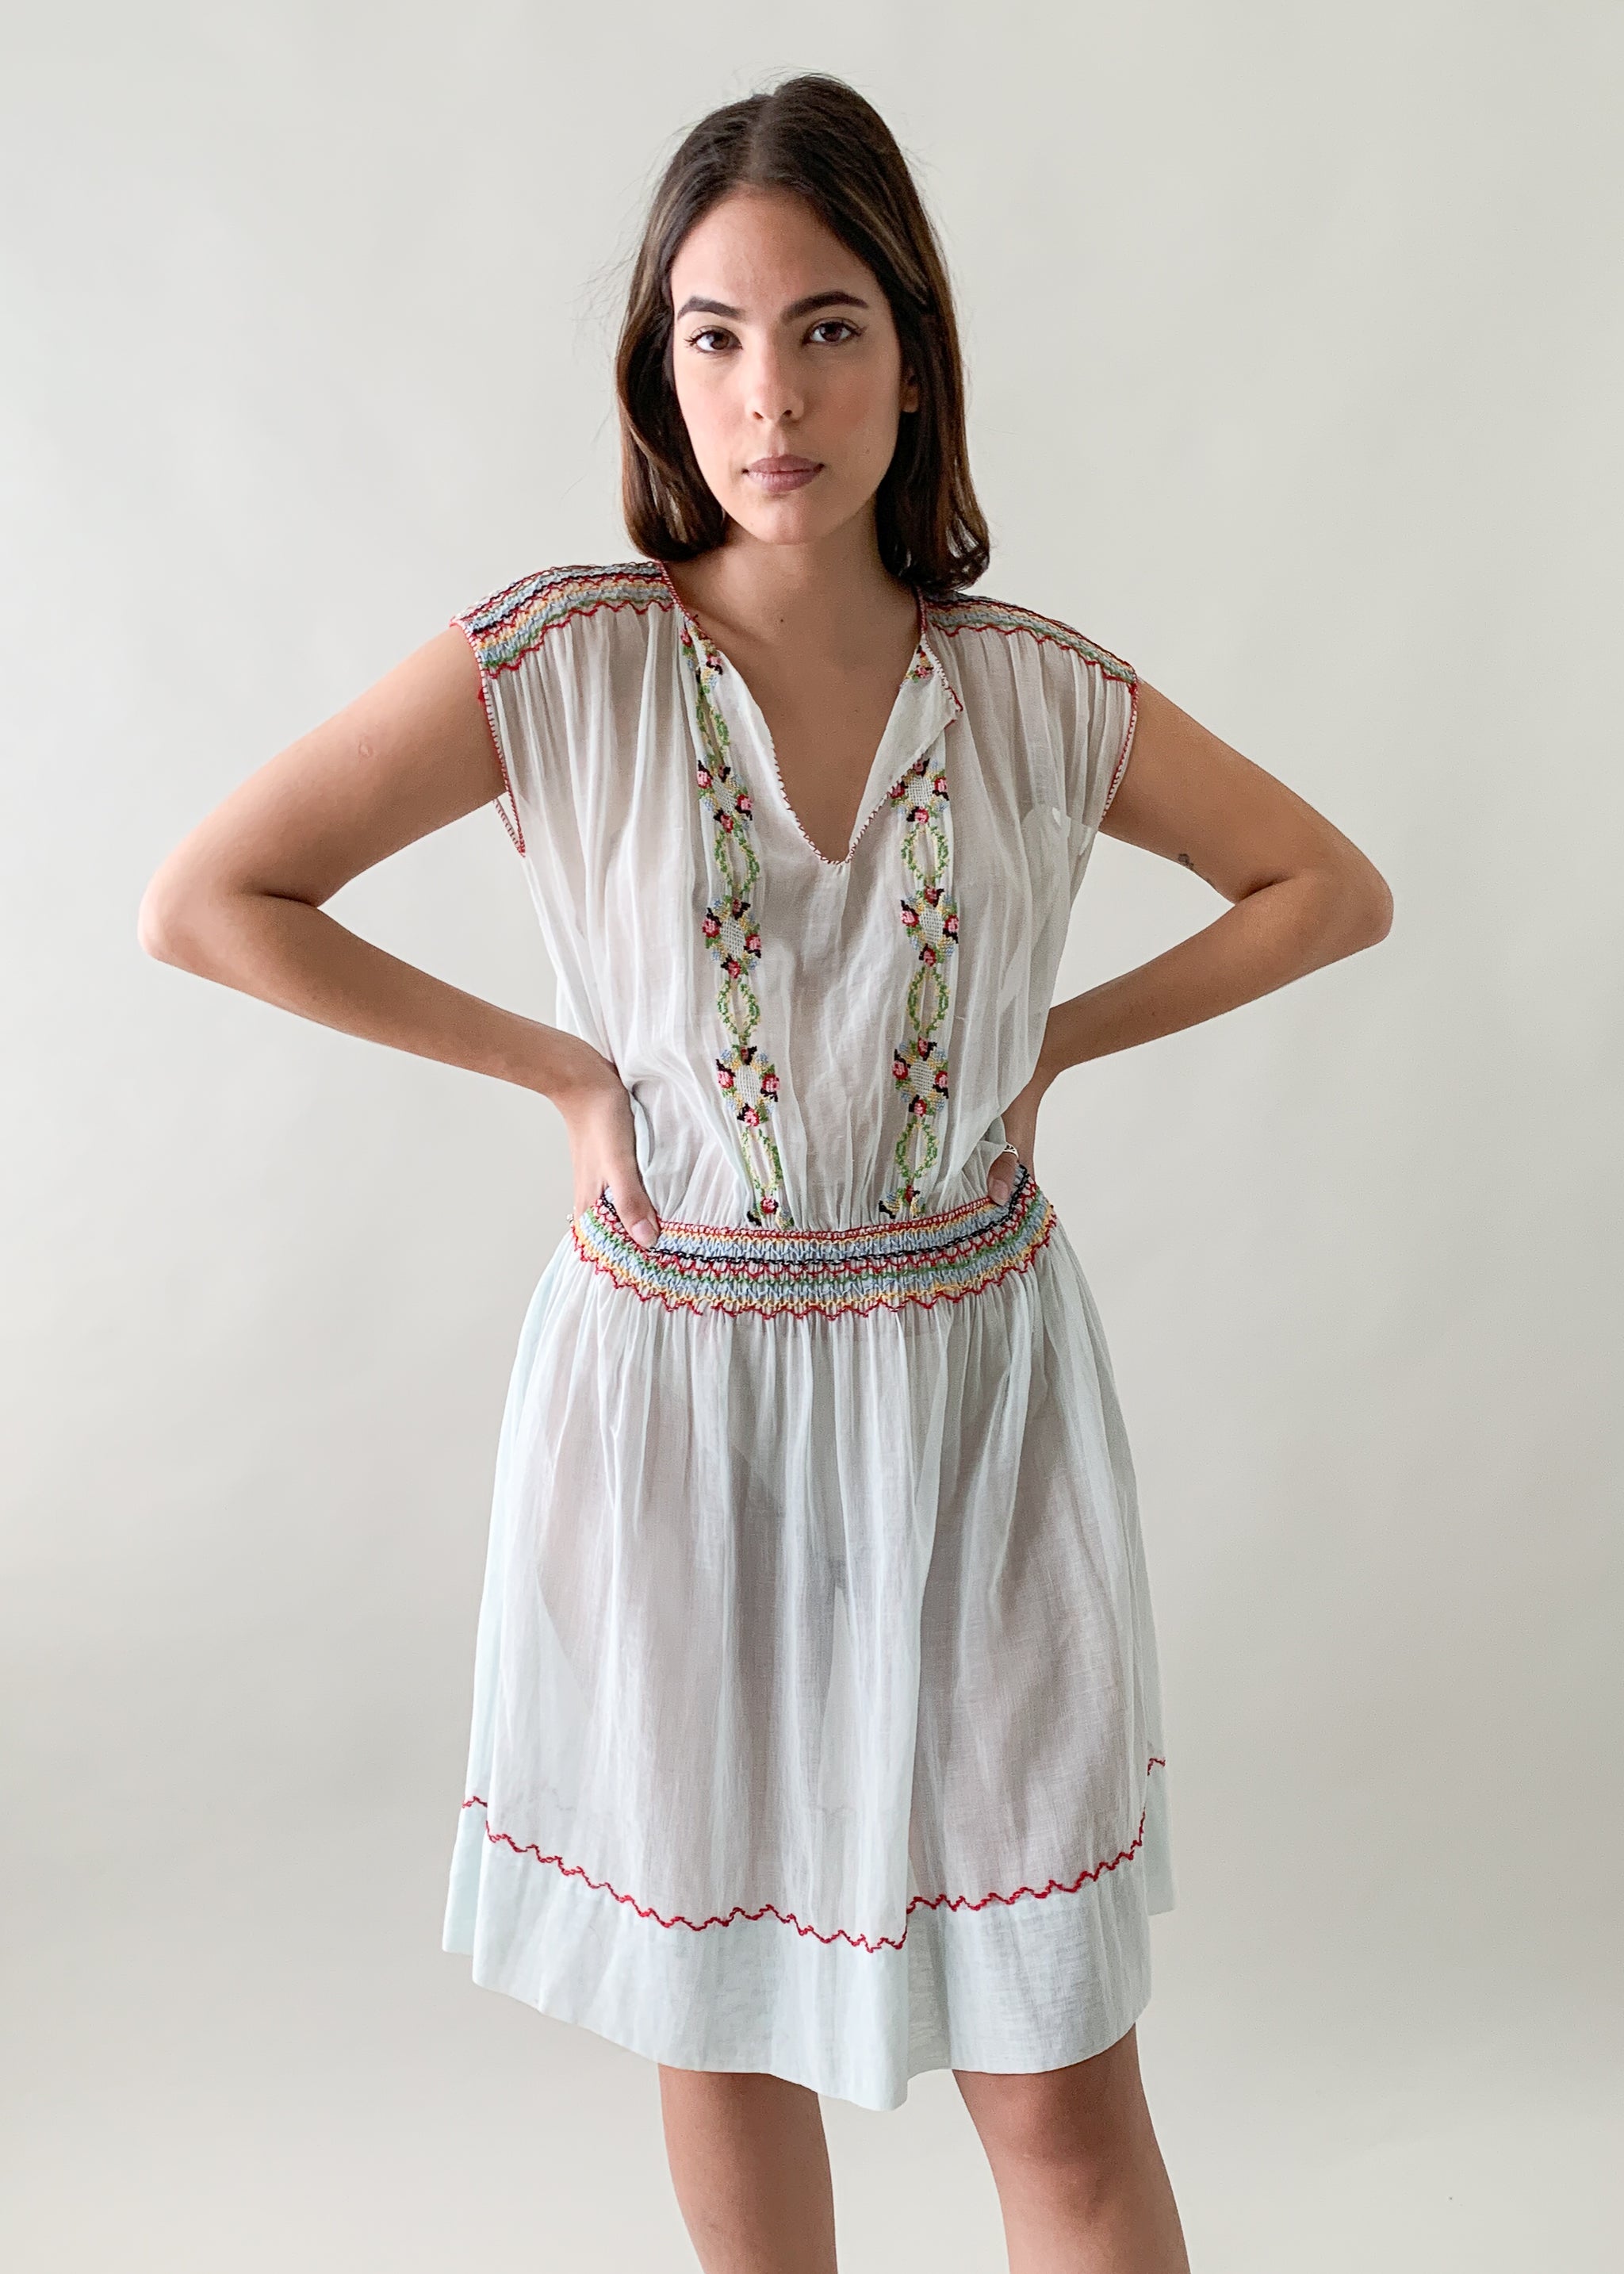 Vintage 1920s Embroidered Cotton Dress - Raleigh Vintage